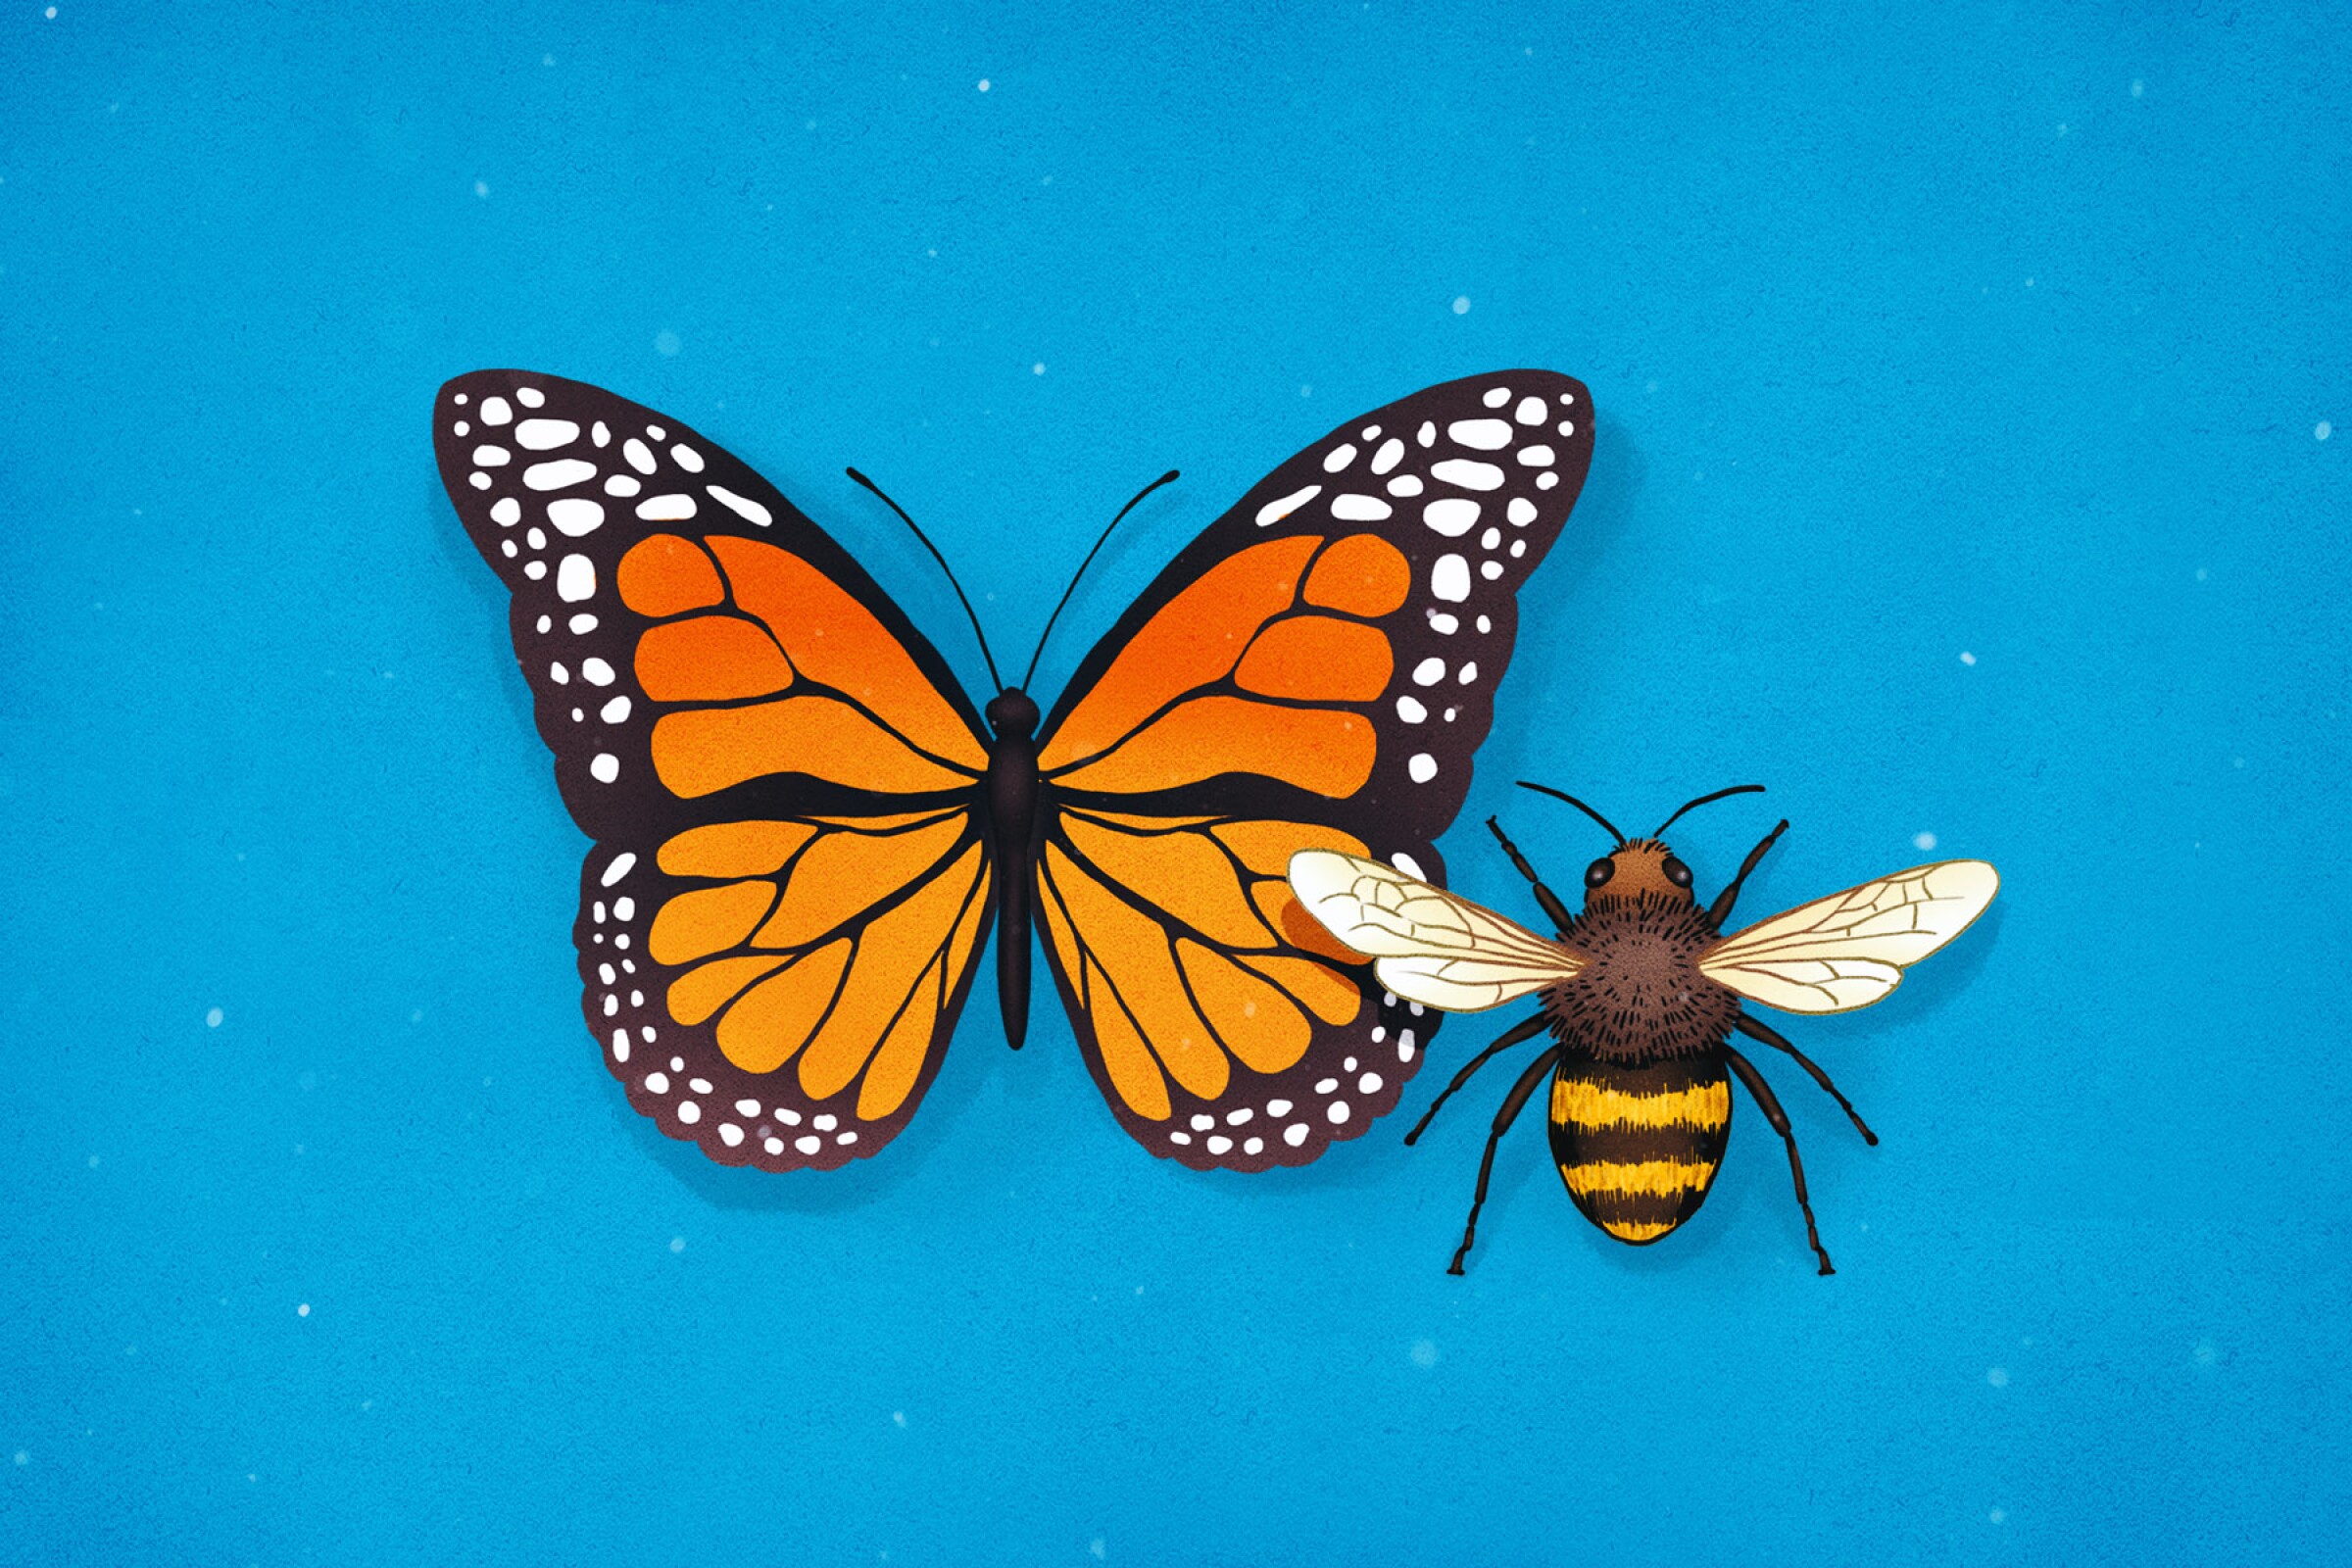 Bees and butterfly illustration